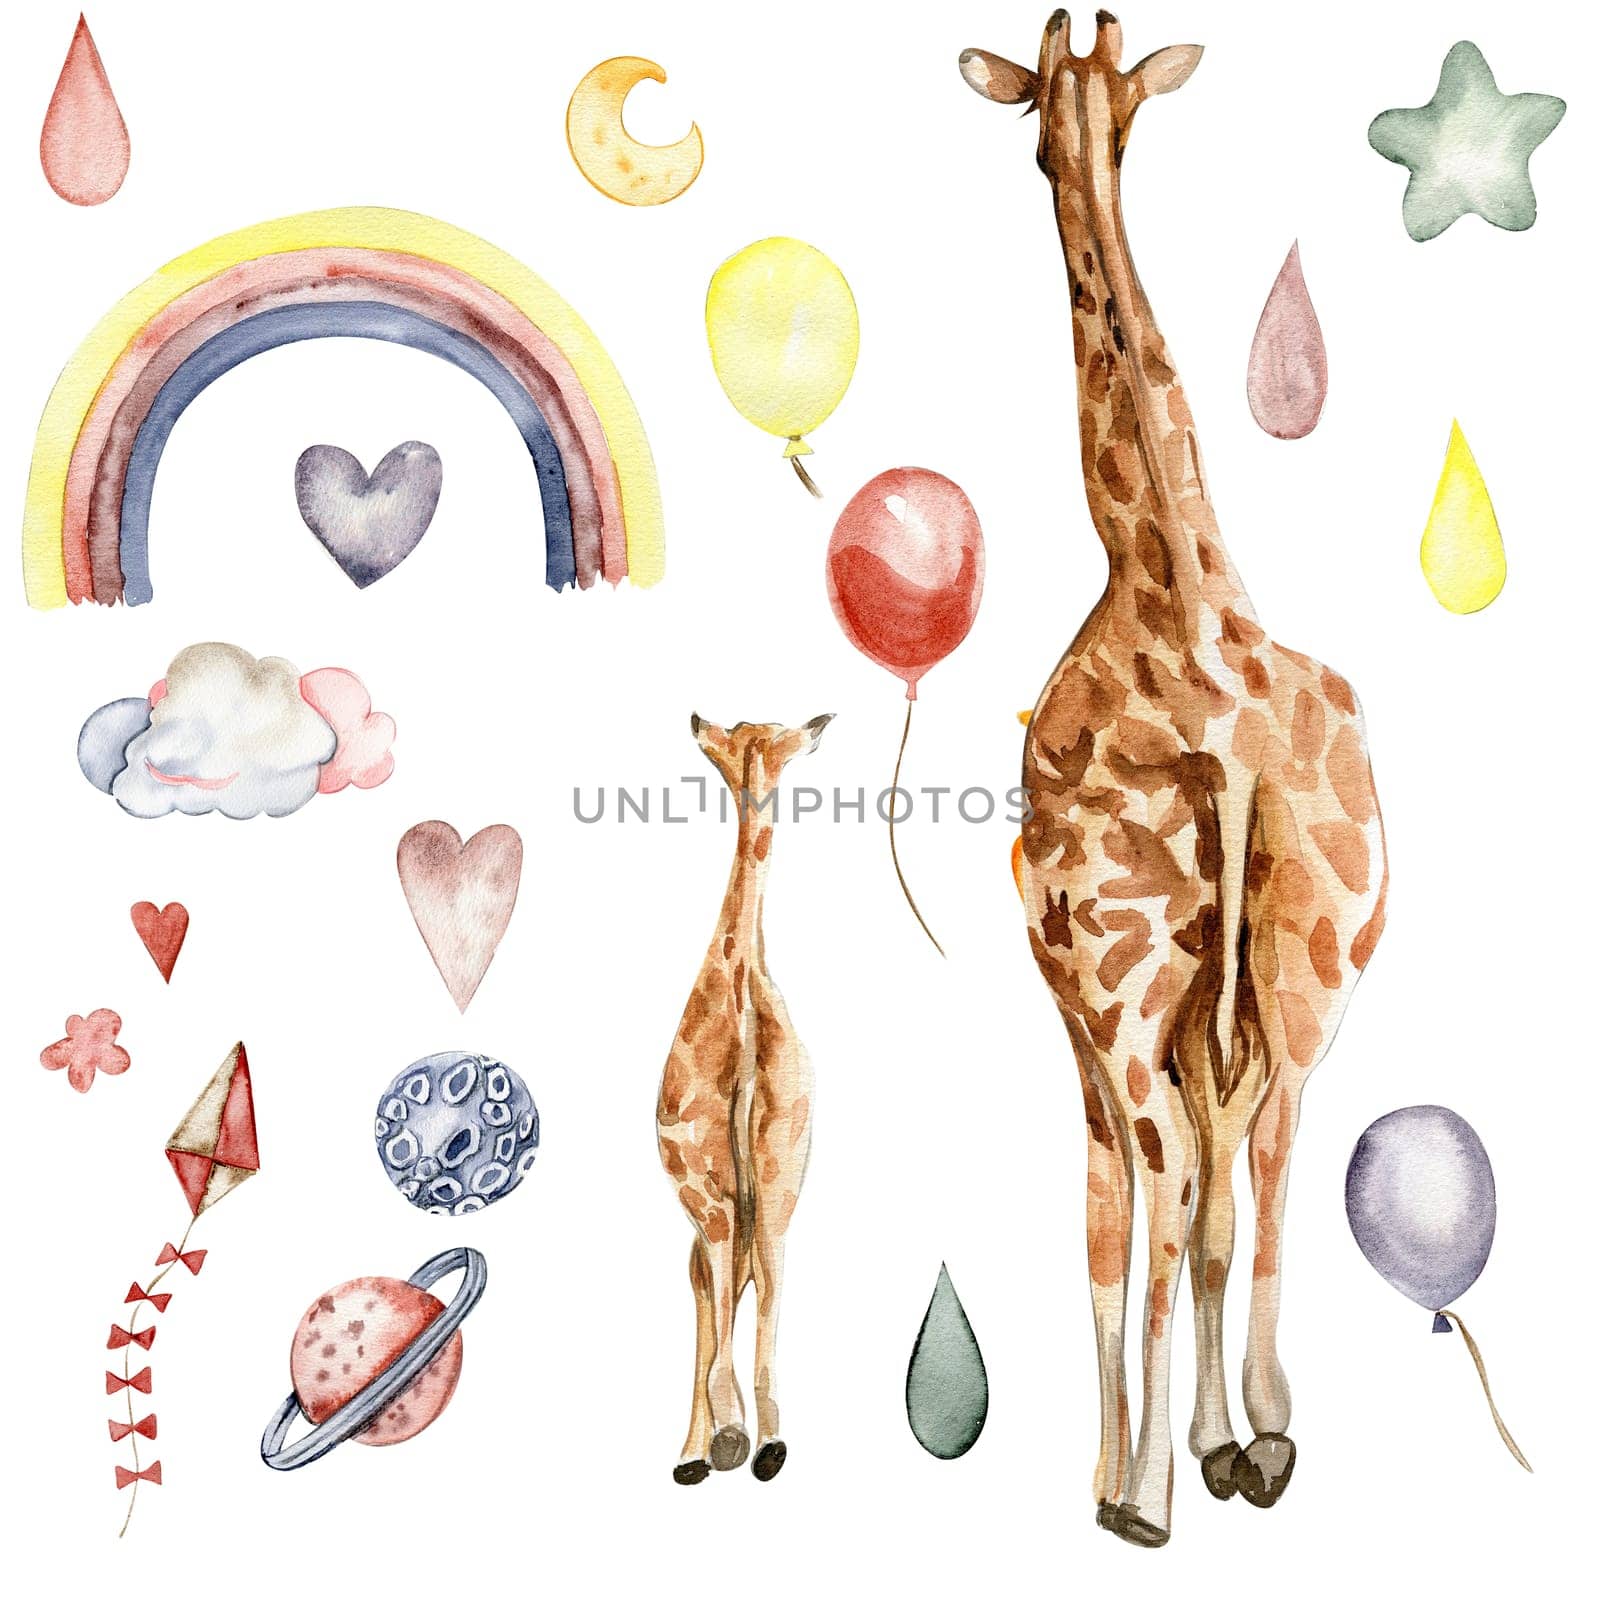 Watecolor hand drawn giraffe illustration and rainbow, Cartoon tropical animal , exotic summer jungle design. Design for baby shower party, birthday, cake, holiday design, greetings card, invitation.